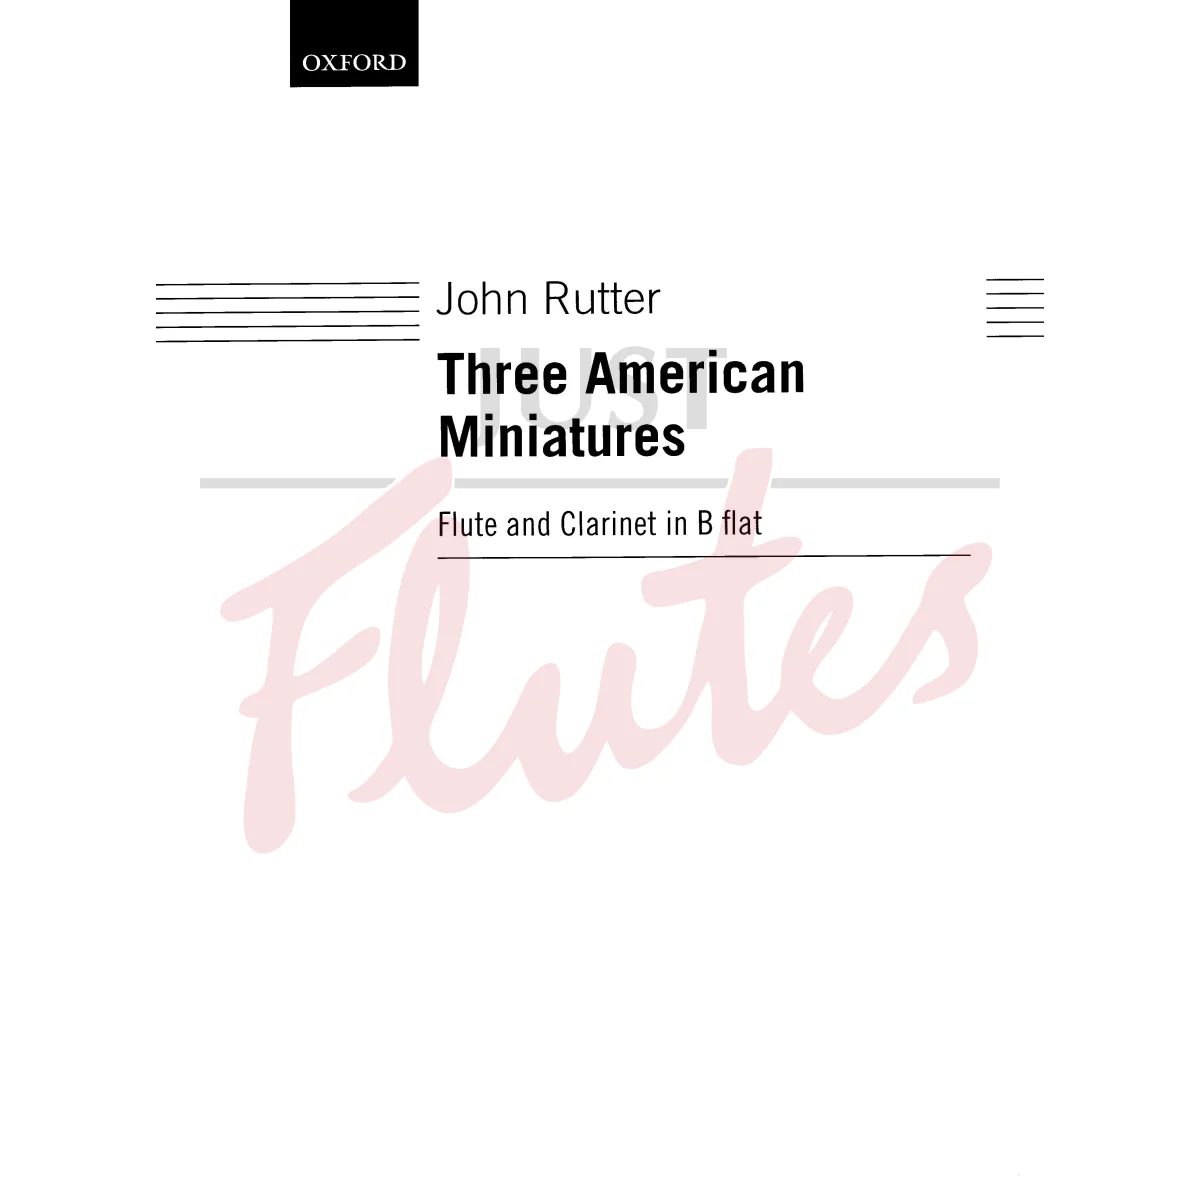 Three American Miniatures for Flute and Clarinet